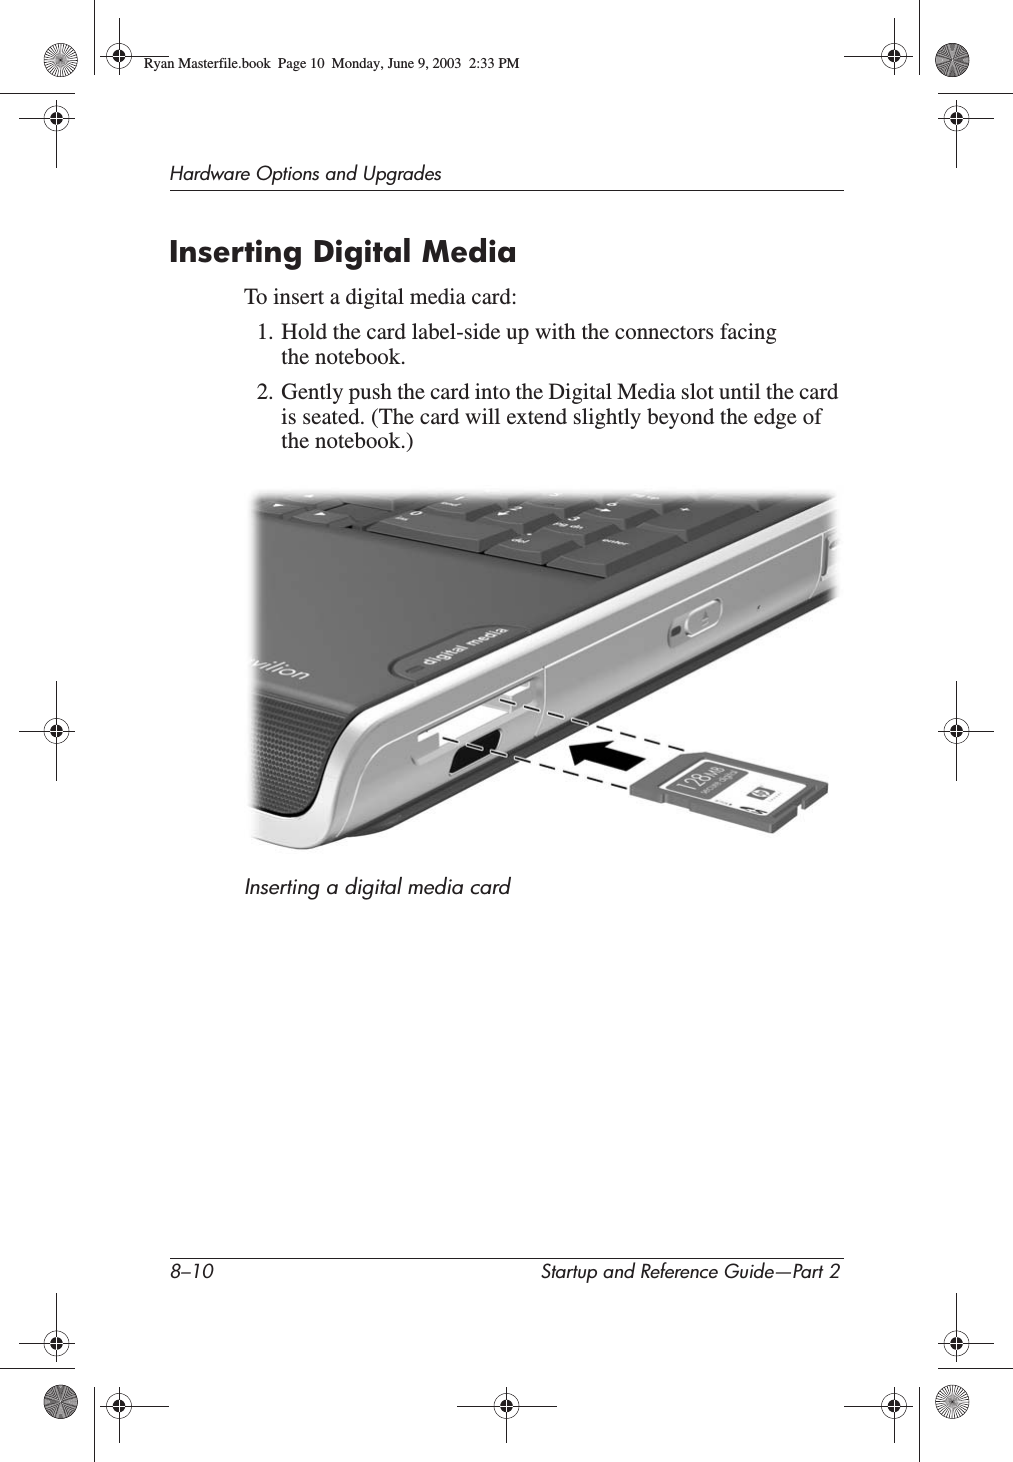 8–10 Startup and Reference Guide—Part 2Hardware Options and UpgradesInserting Digital MediaTo insert a digital media card:1. Hold the card label-side up with the connectors facing the notebook.2. Gently push the card into the Digital Media slot until the card is seated. (The card will extend slightly beyond the edge of the notebook.)Inserting a digital media cardRyan Masterfile.book  Page 10  Monday, June 9, 2003  2:33 PM